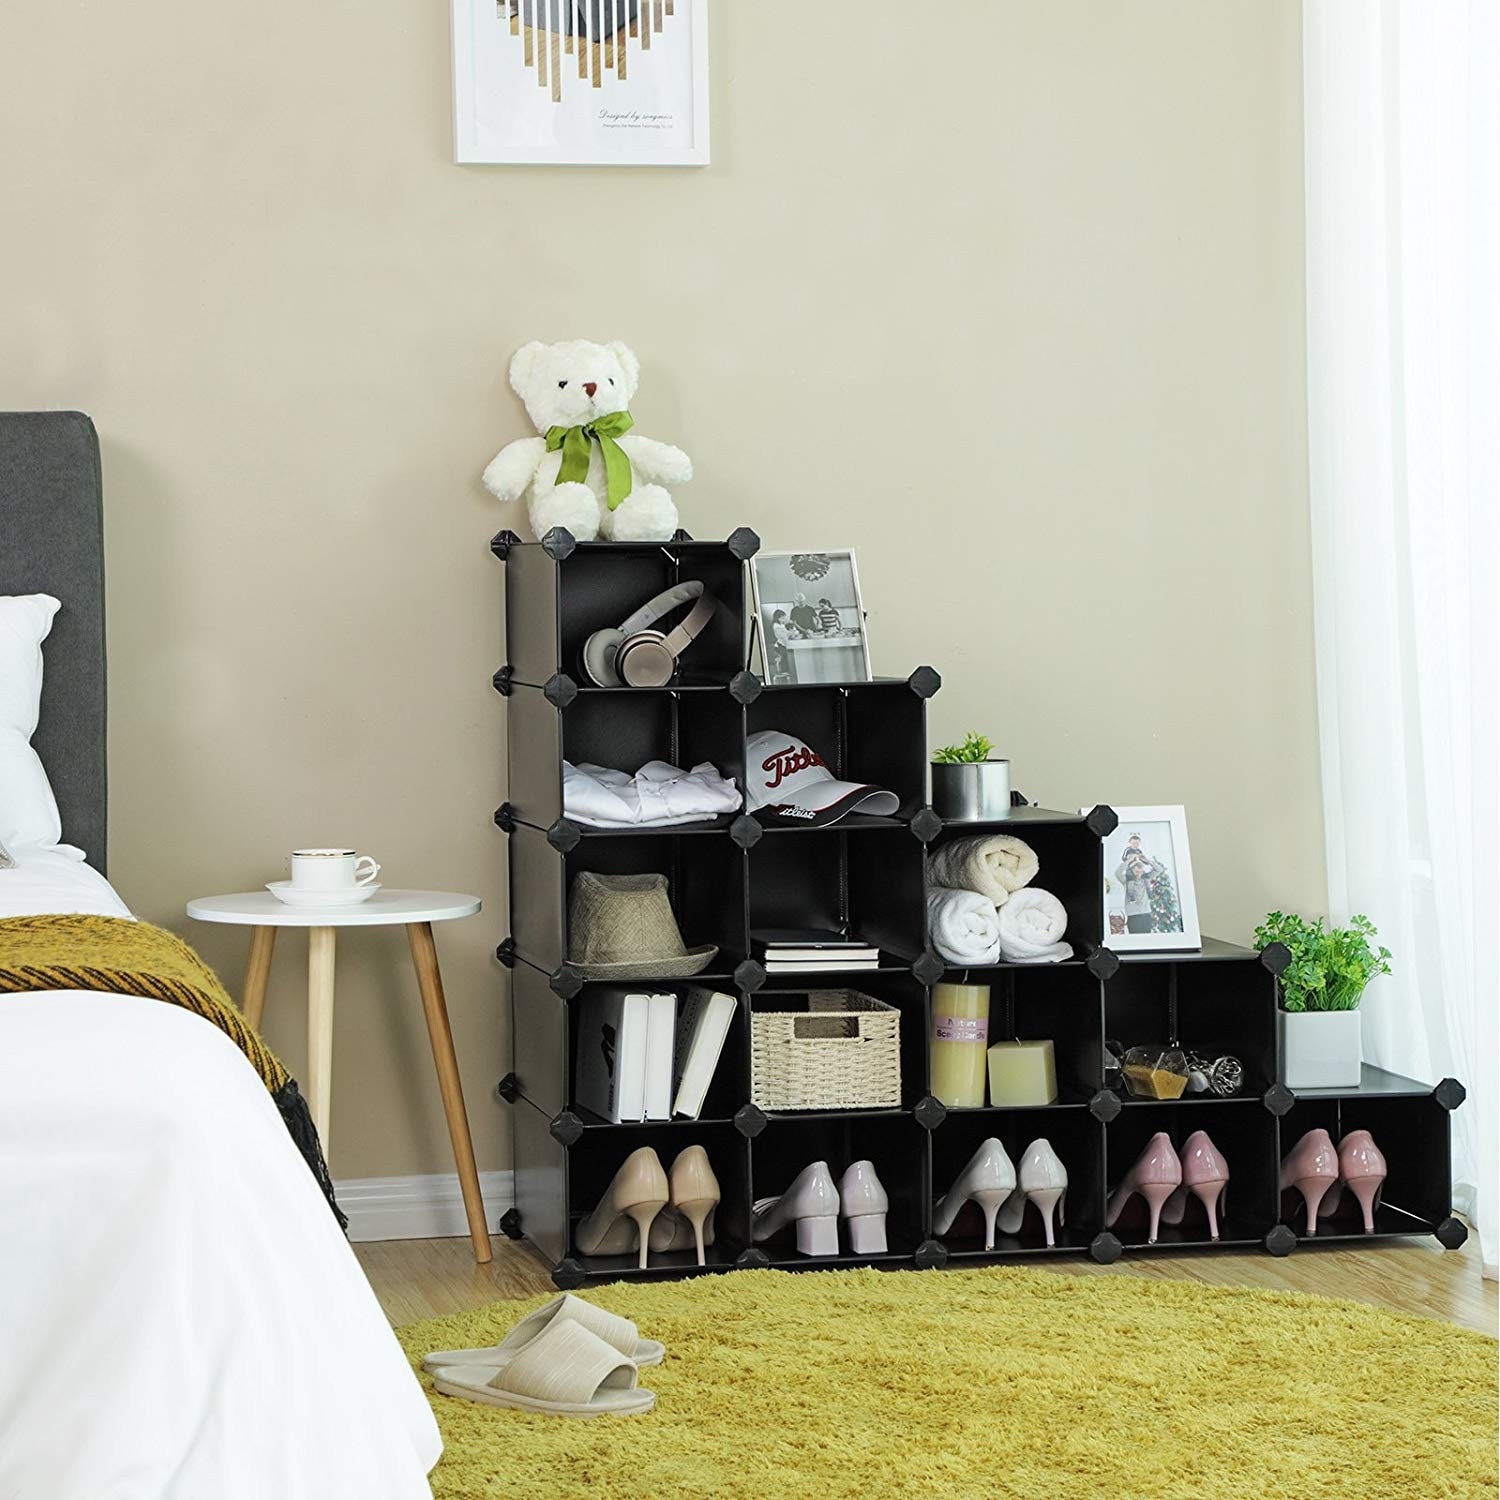 https://ak1.ostkcdn.com/images/products/is/images/direct/5997f7bf788ef6e3e64c417e8bc2cc1b366f7c82/Shoe-Rack%2C16-Cube-Modular-Storage%2CSpace-Saving-Plastic-Shoe-Organizer-Units%2C-Closet-Cabinet%2C-Ideal-for-Entryway-Hallway.jpg